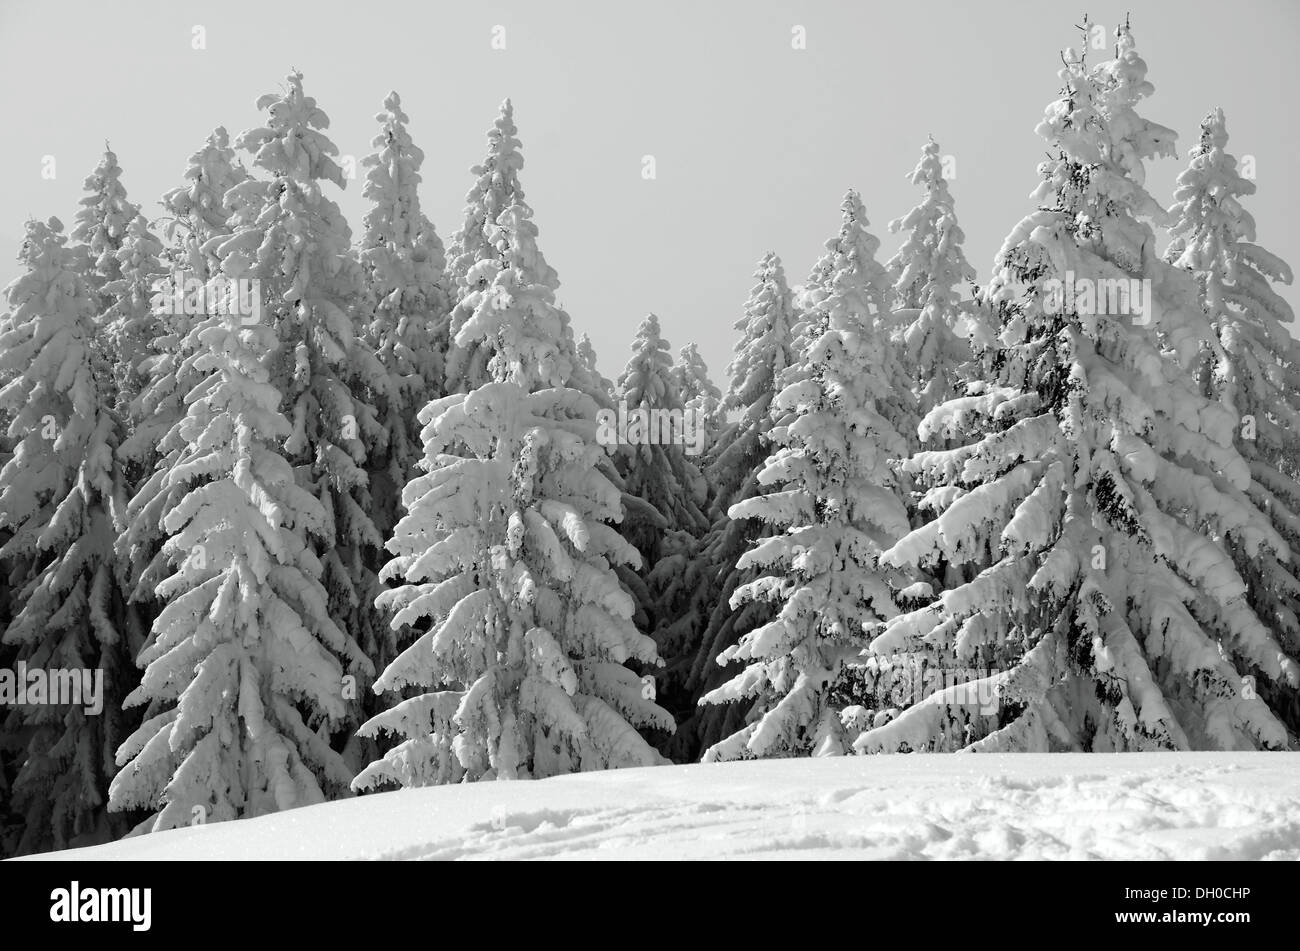 Snow-covered Spruce trees (Picea abies) in a winter landscape, near Elbach, Leitzachtal valley, Upper Bavaria Stock Photo